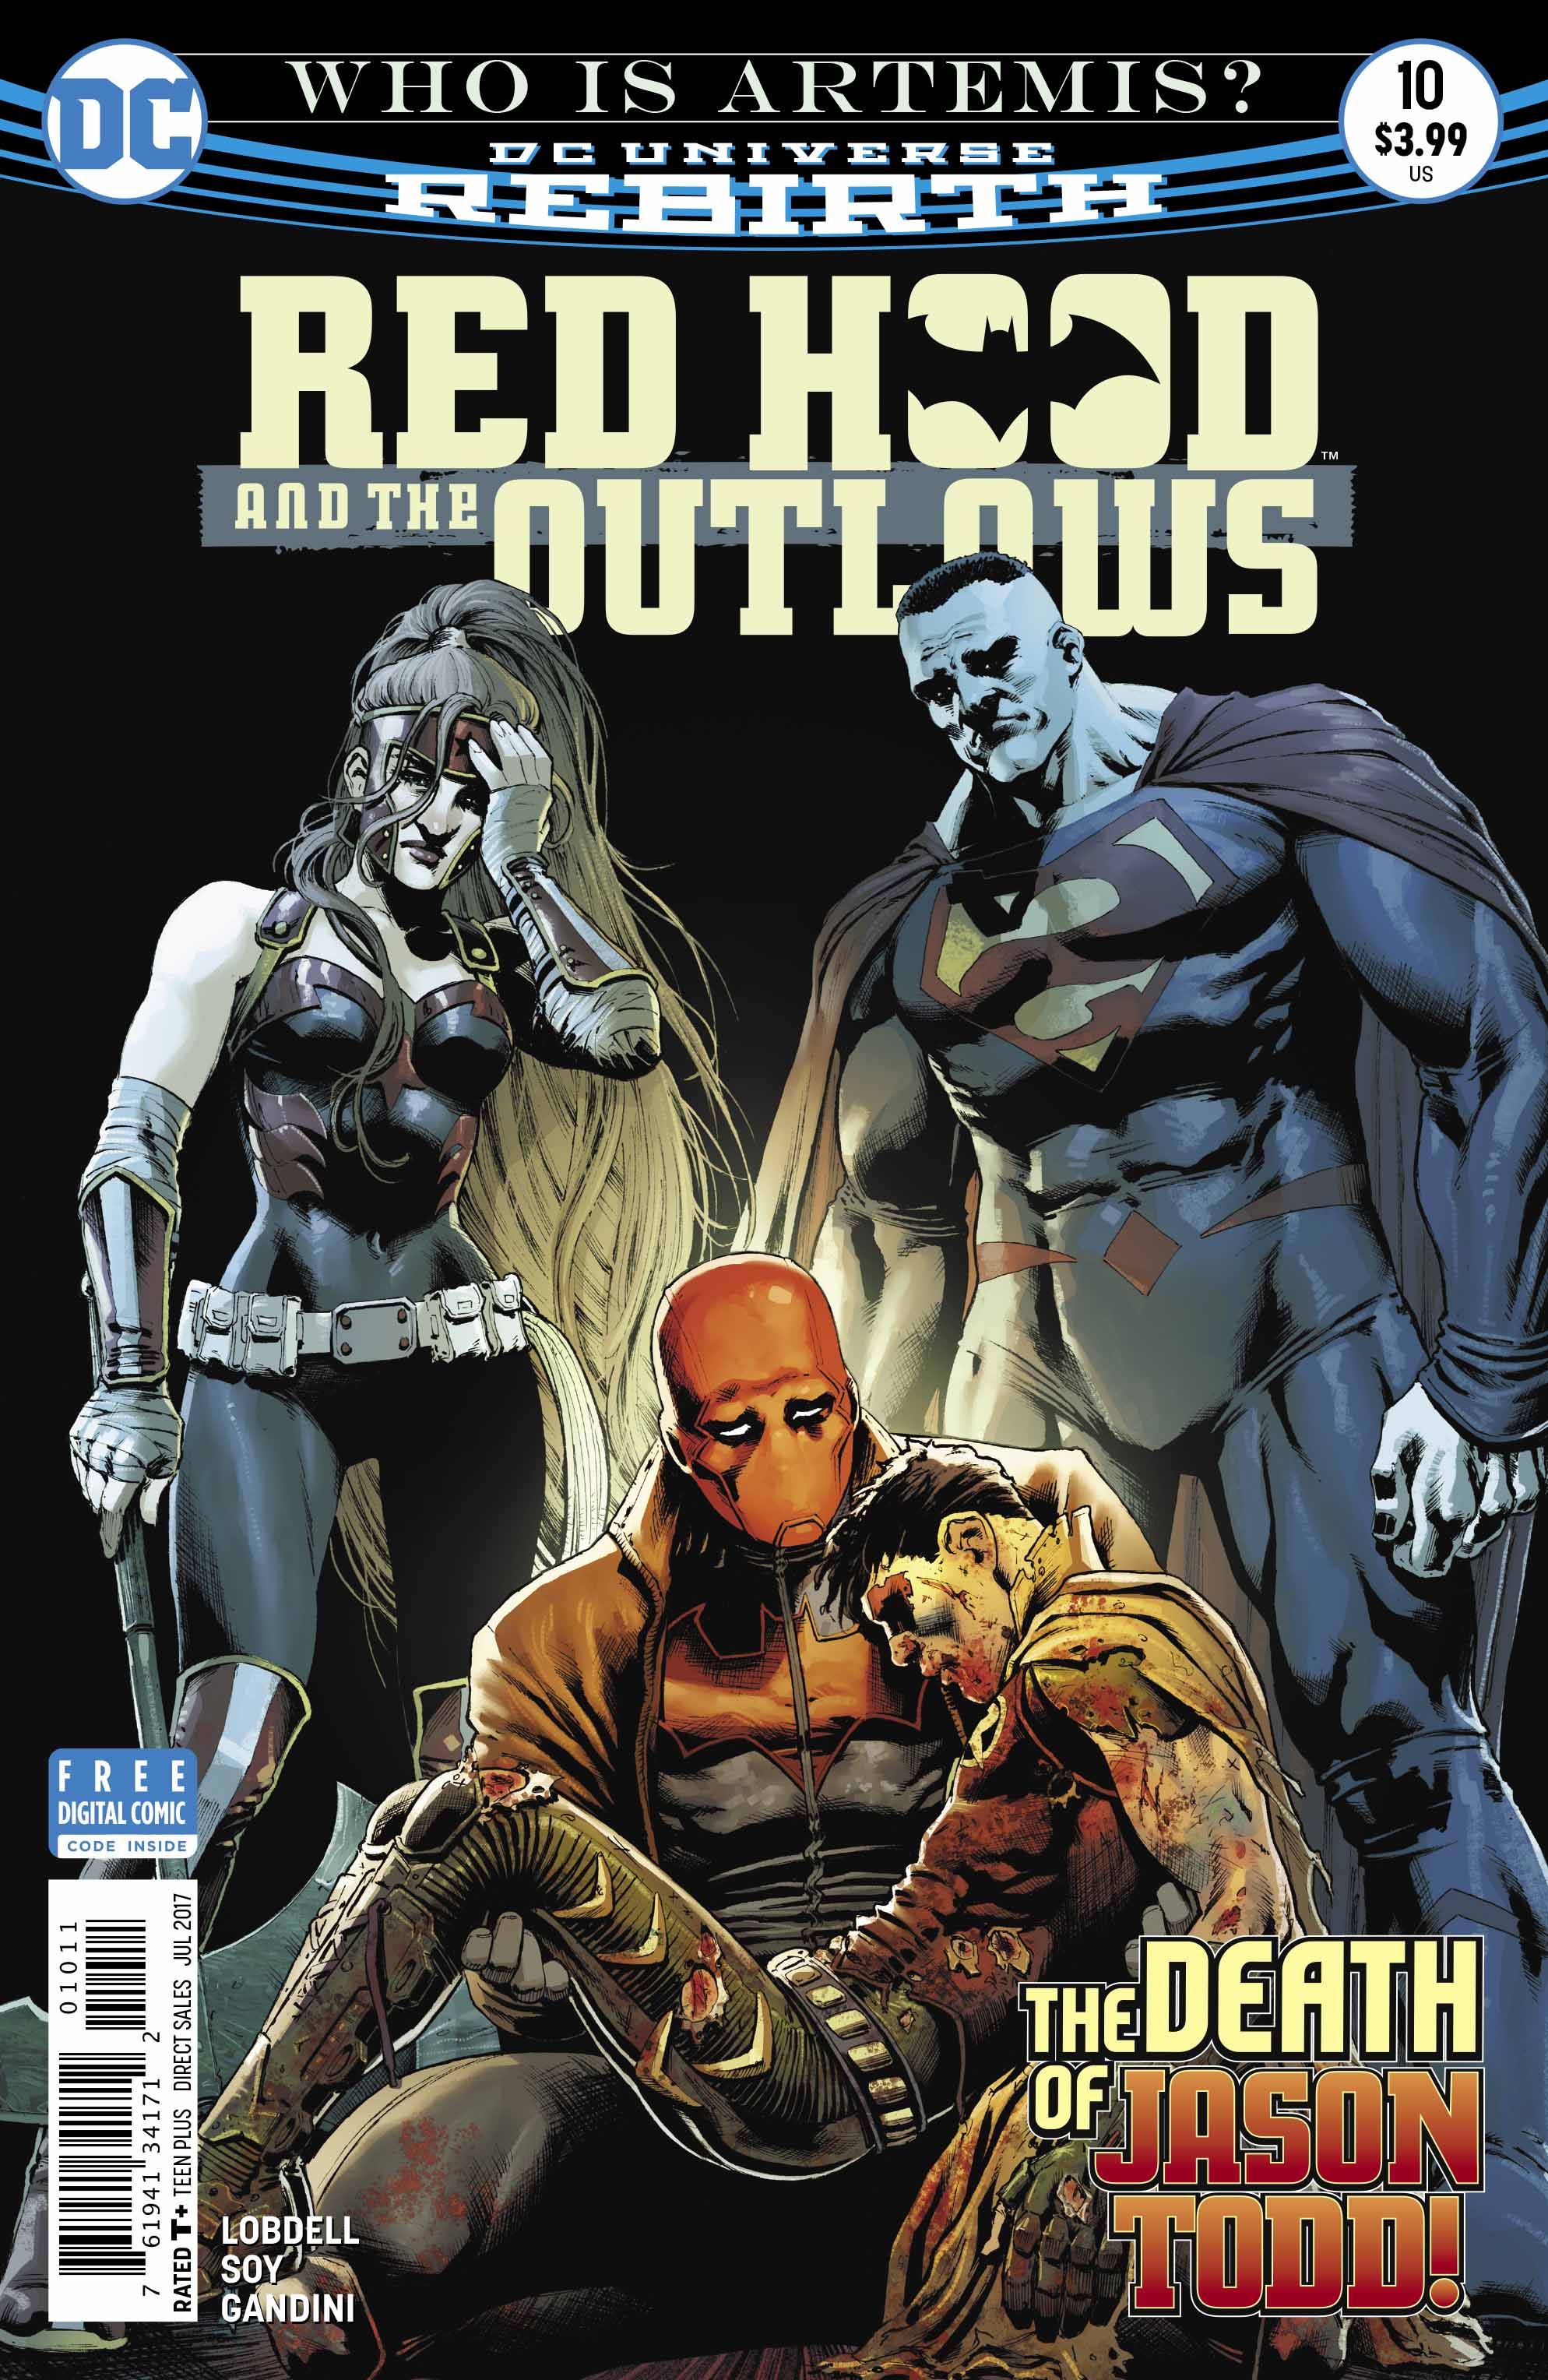 [EXCLUSIVE] DC Preview: Red Hood and the Outlaws #10